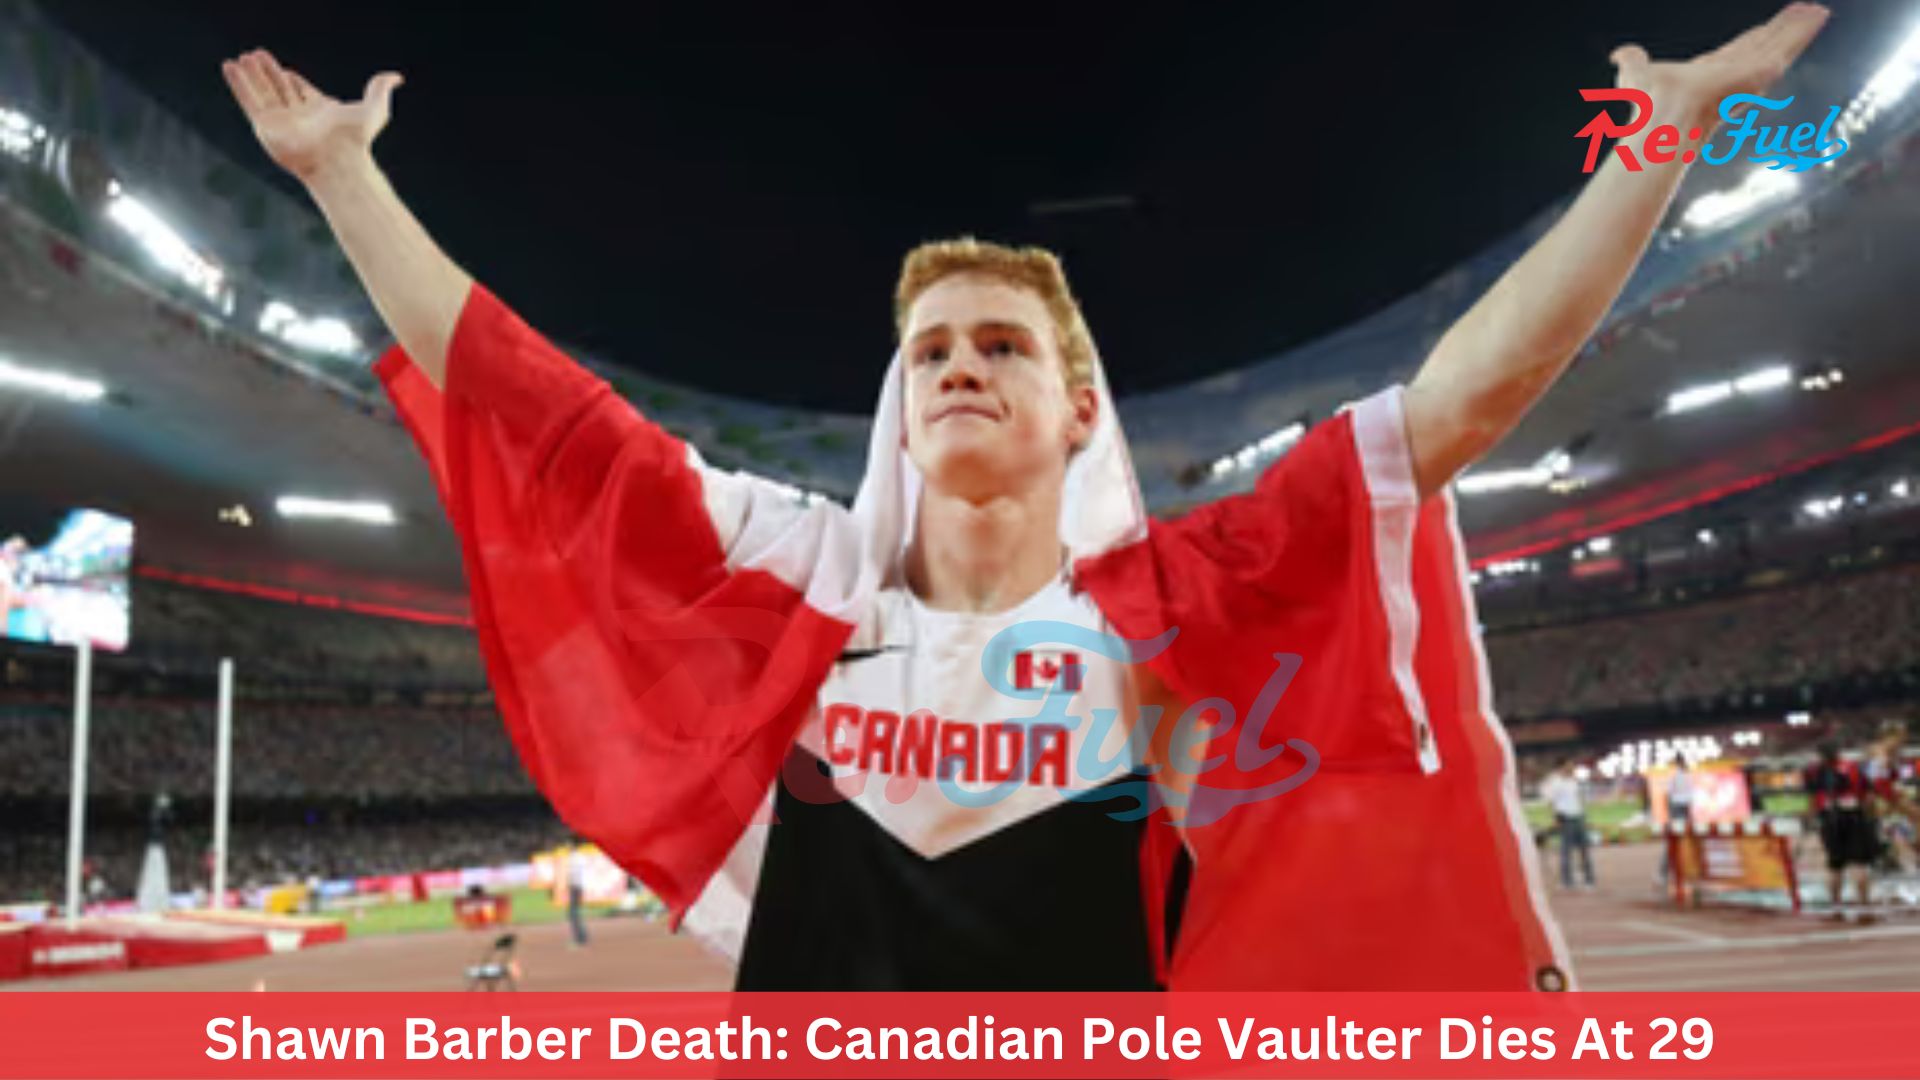 Shawn Barber Death: Canadian Pole Vaulter Dies At 29